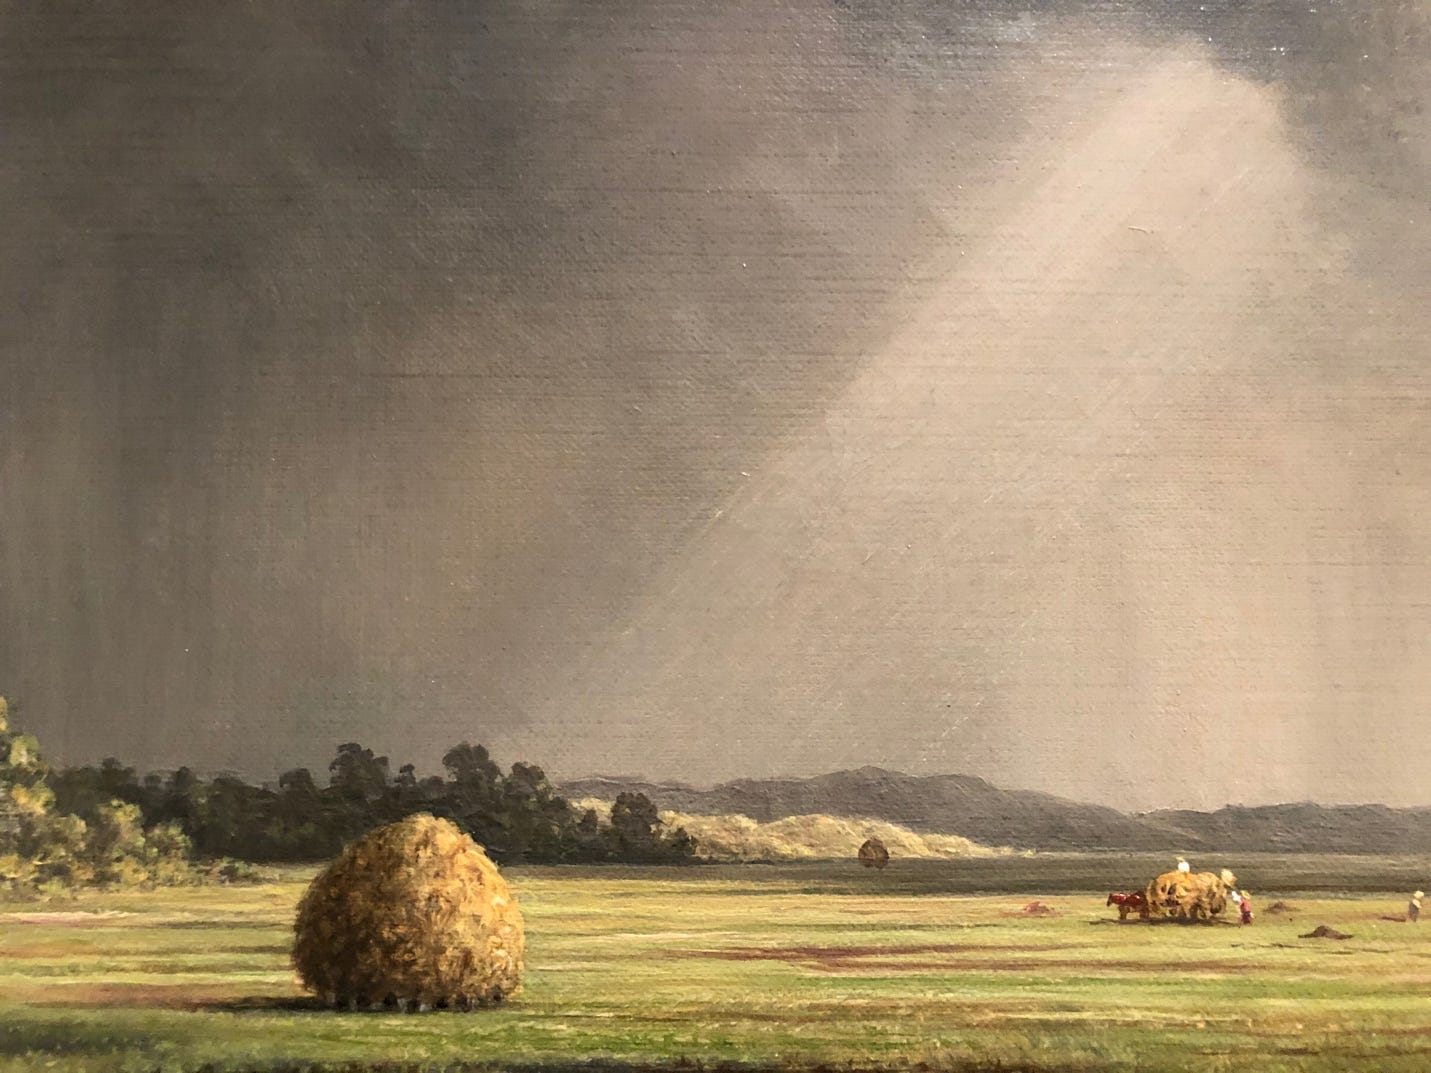 A painting of a field with hay bales

Description automatically generated